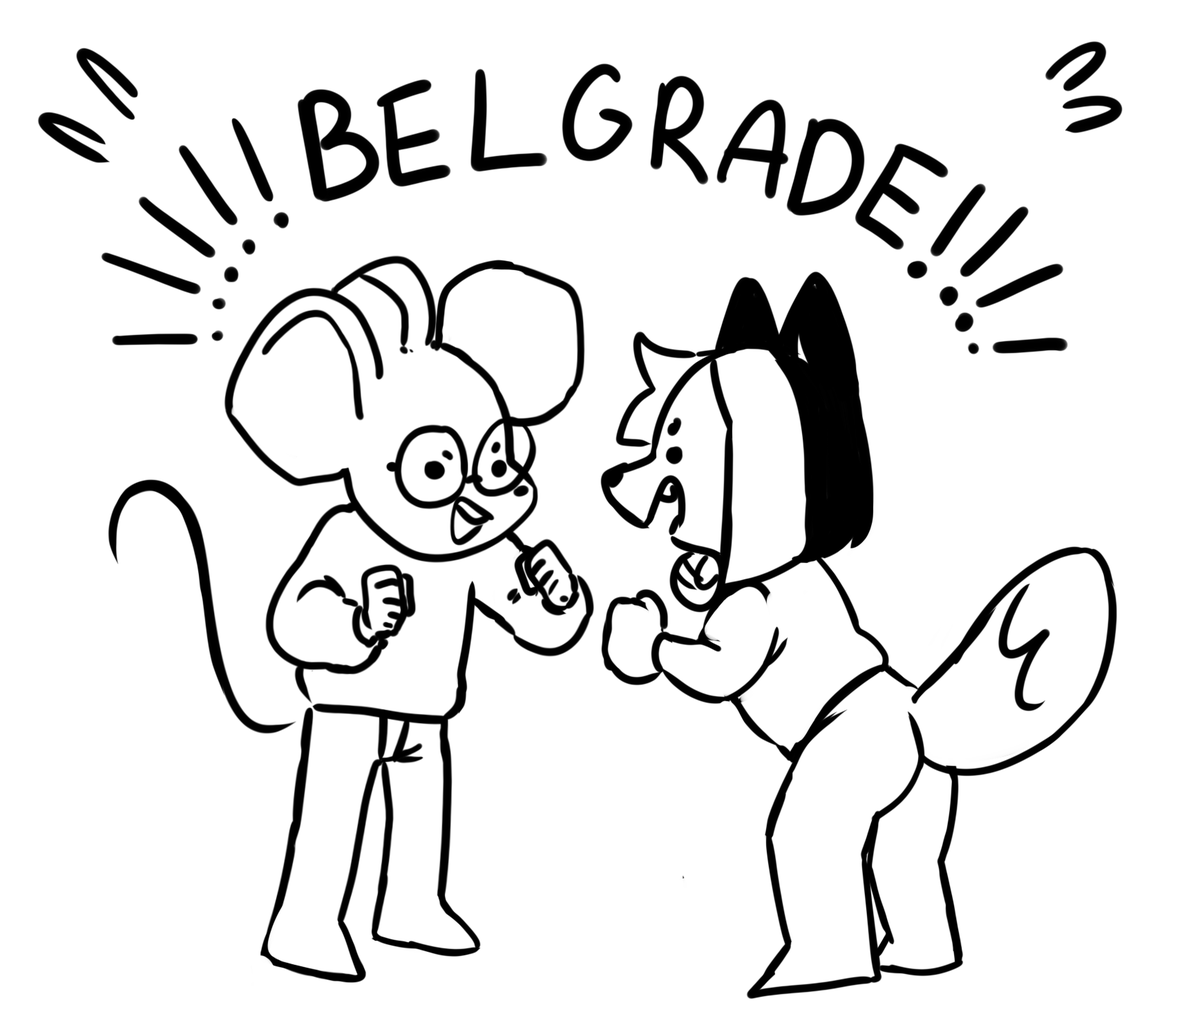 Some doodles I did on stream! I can't wait to meet @MouthlessMouse in Belgrade tomorrow!!! :D 